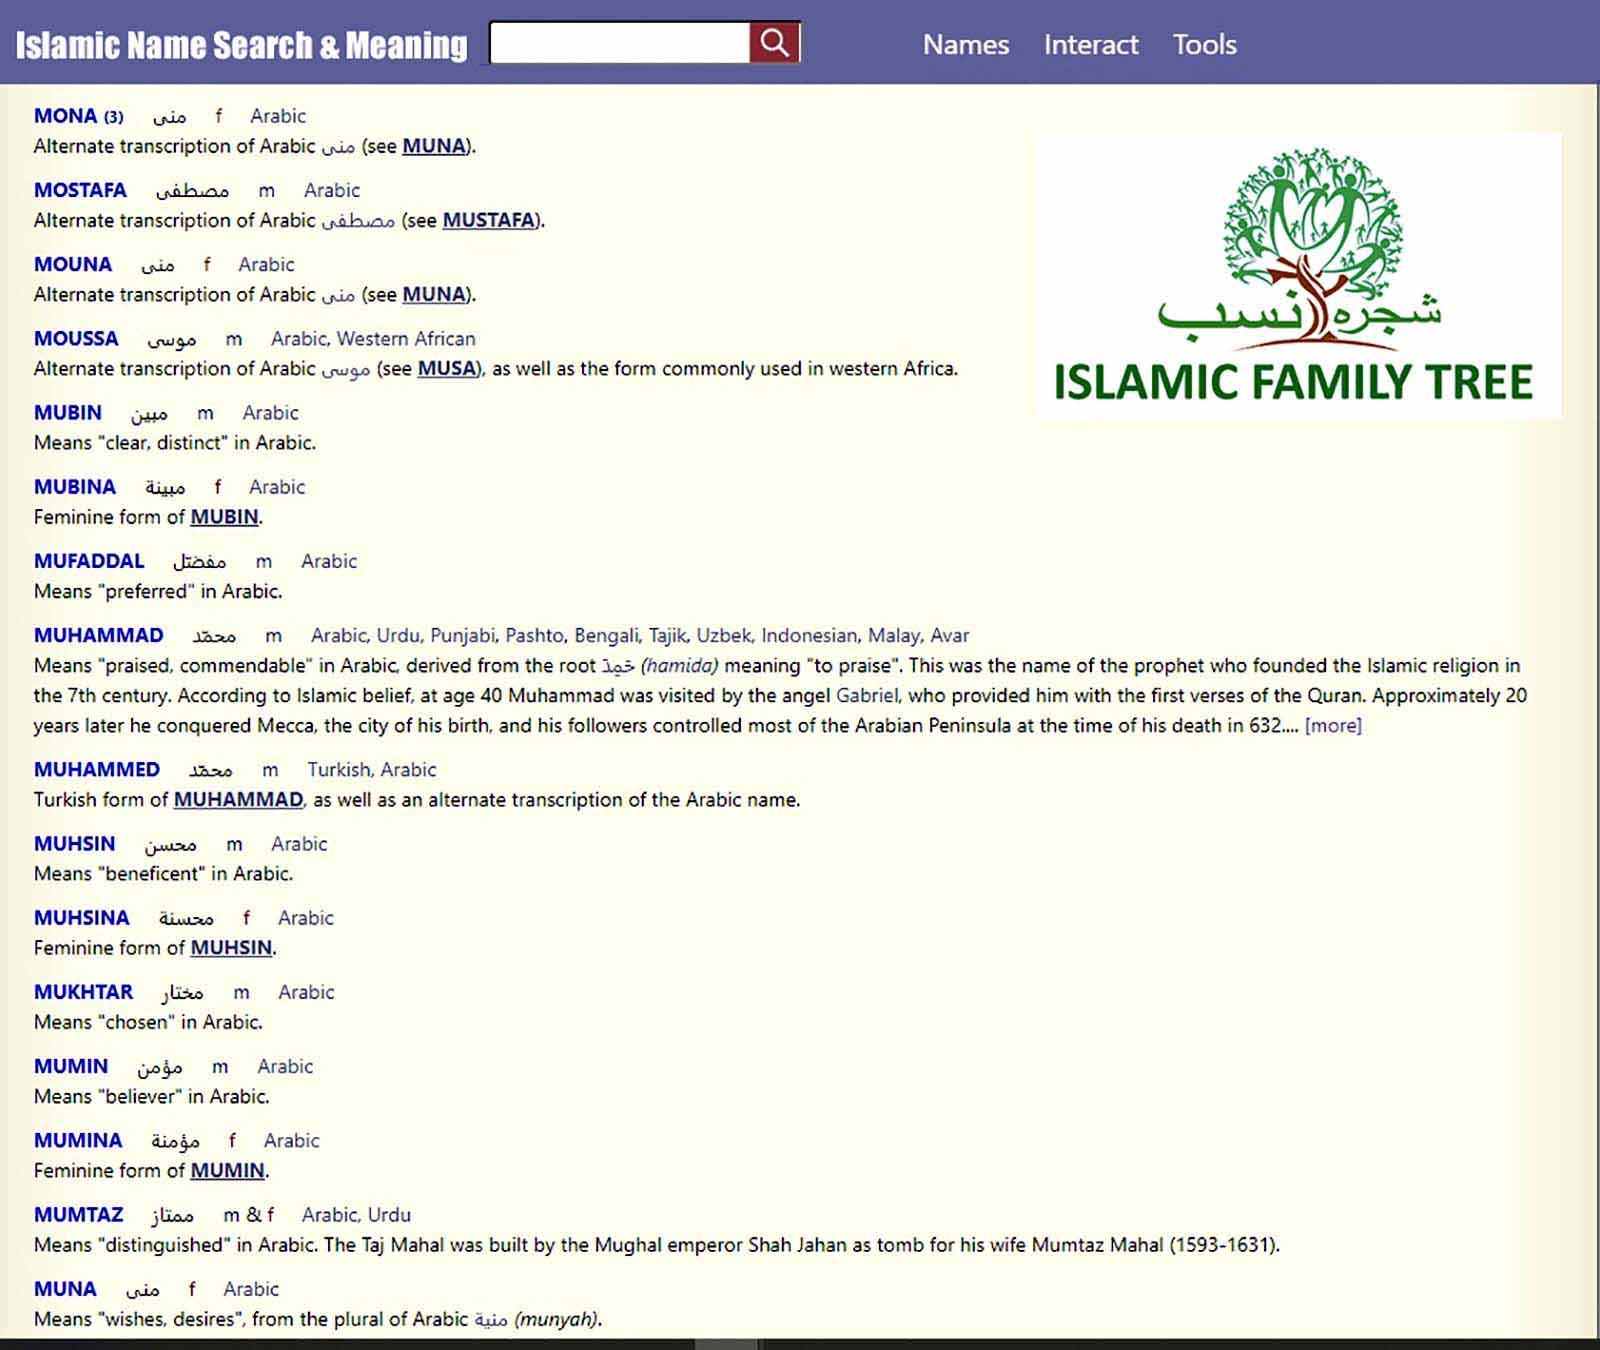 Islamic Name Search and Meaning